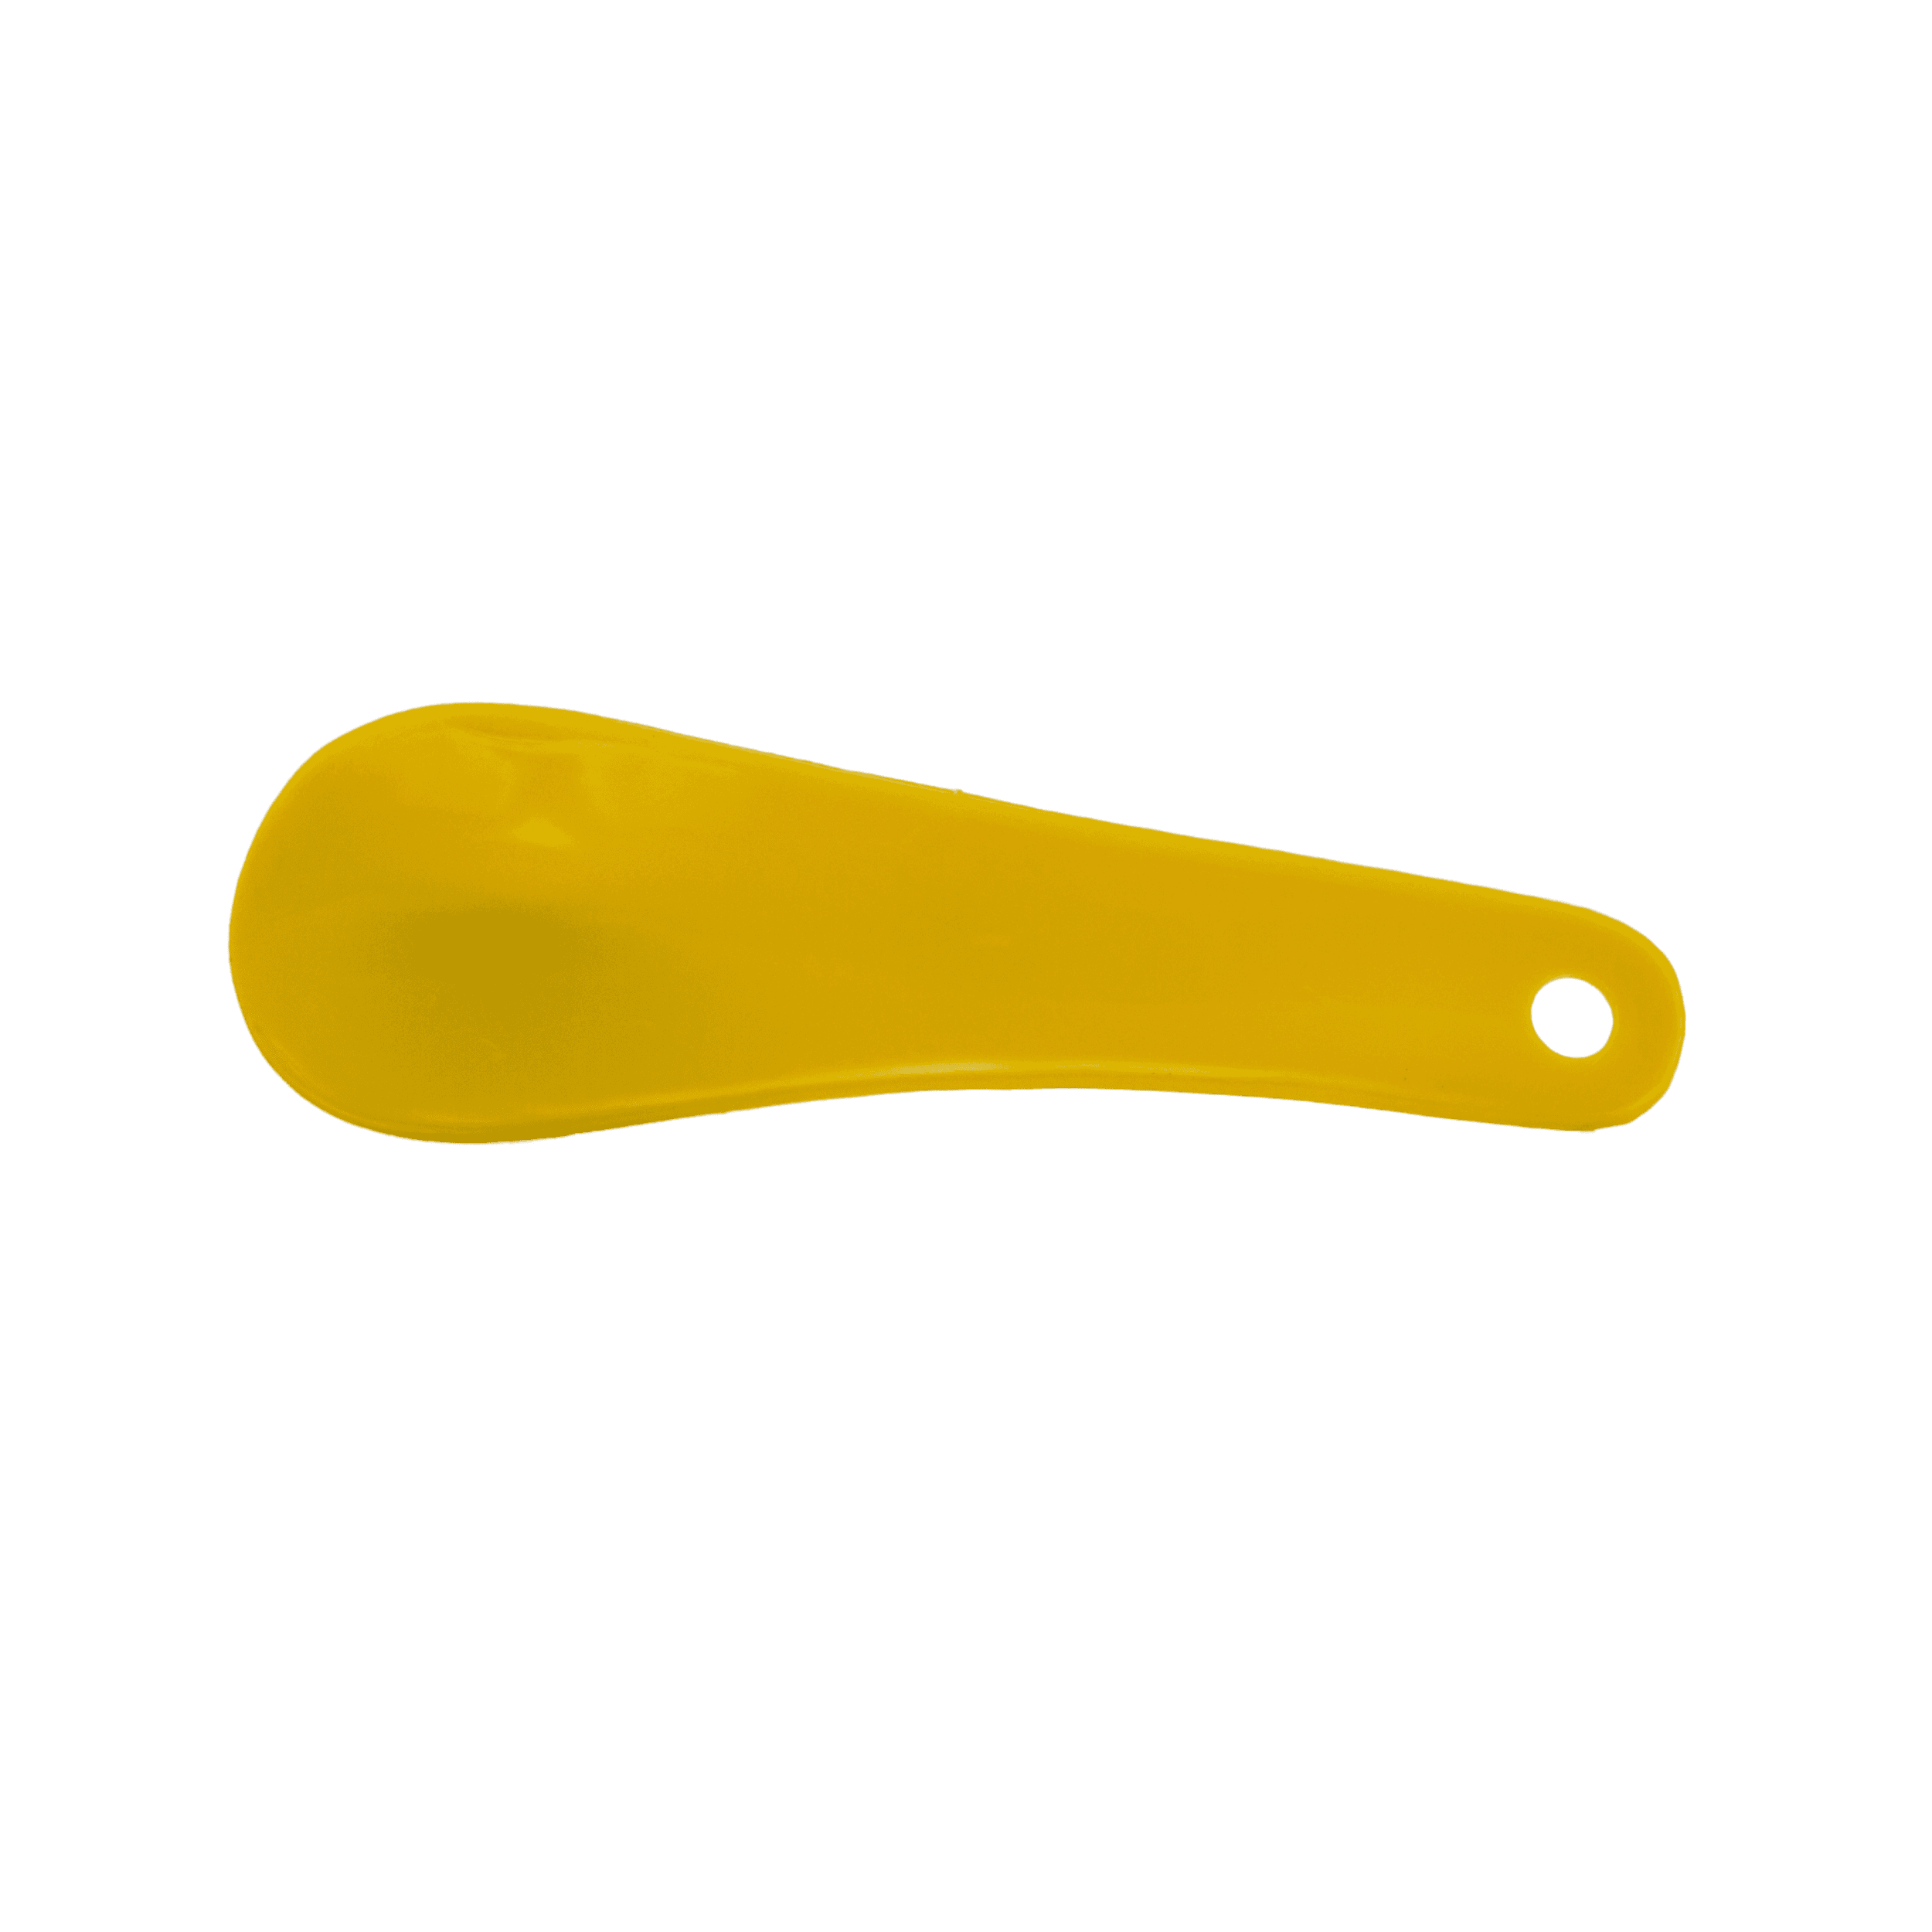 Plastic shoehorn, small POLISH PRODUCT